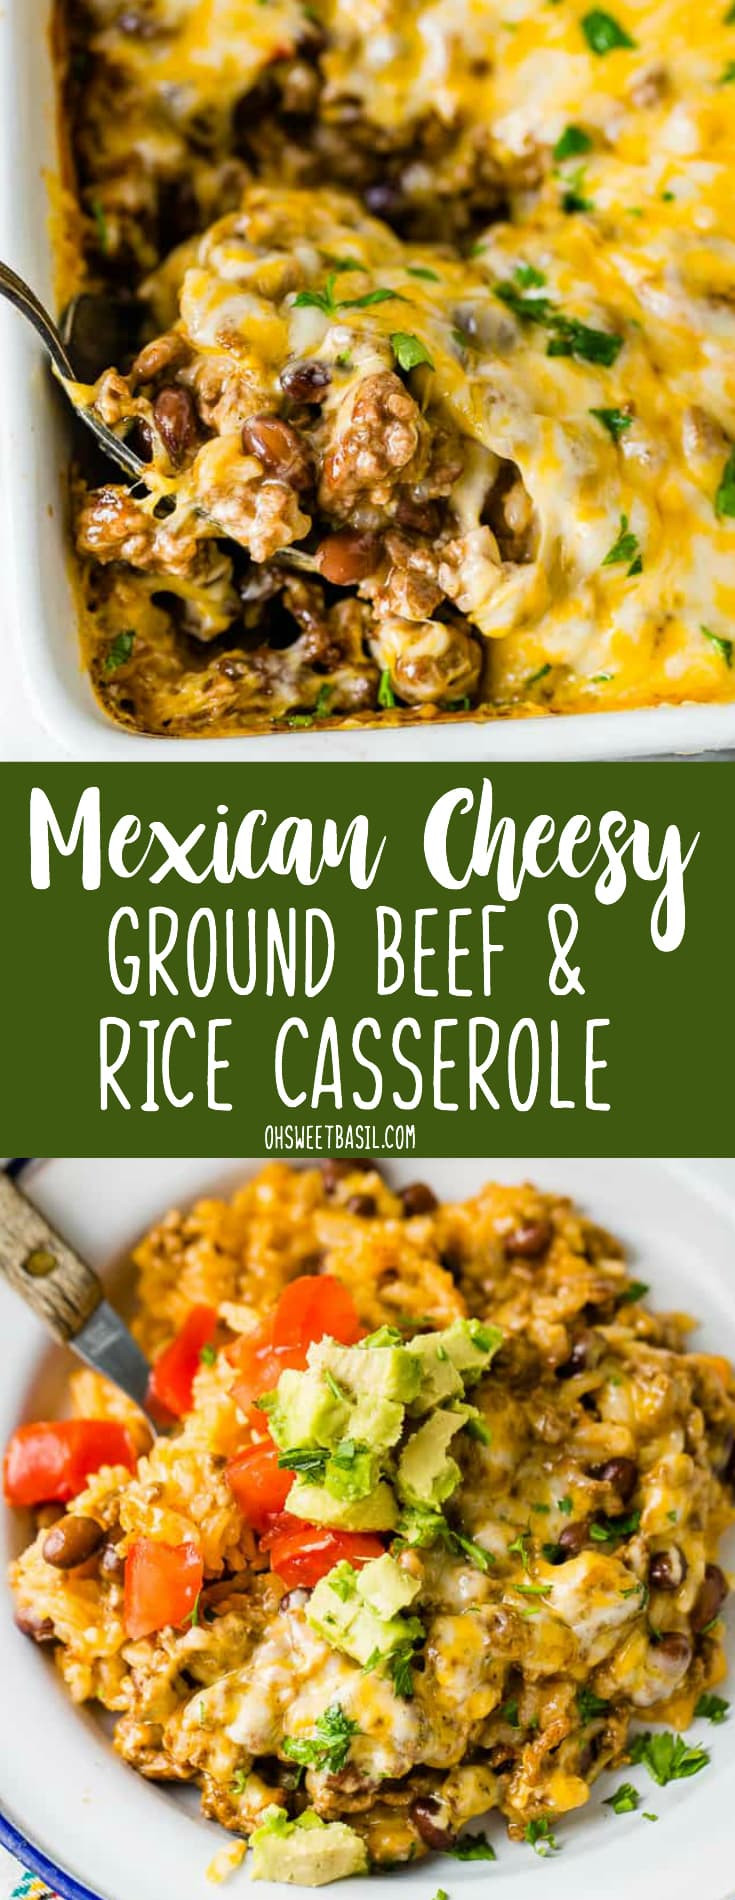 Mexican Casseroles With Ground Beef
 Cheesy Ground Beef & Rice Mexican Casserole Video Oh